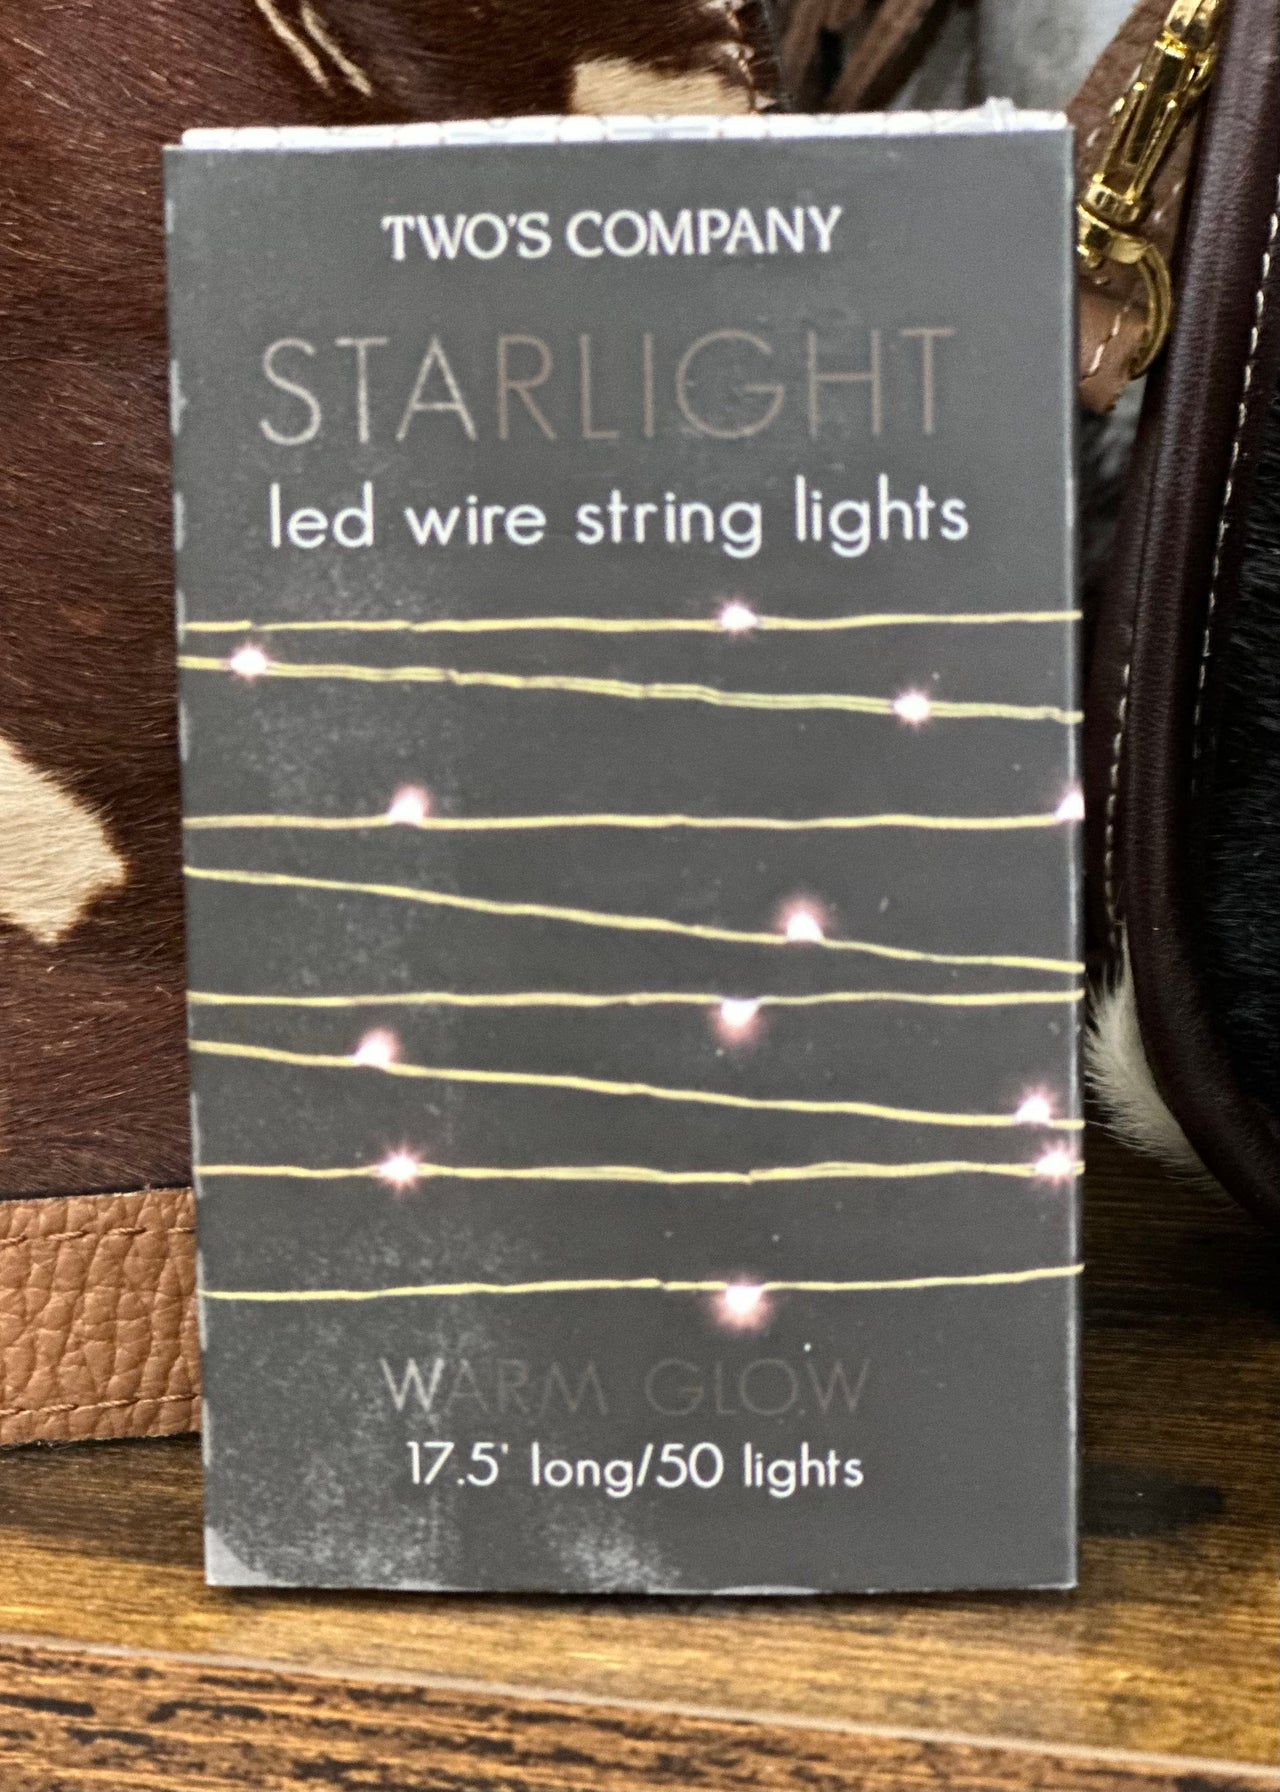 Starlight Wire LED Lights Two’s Company Soft White